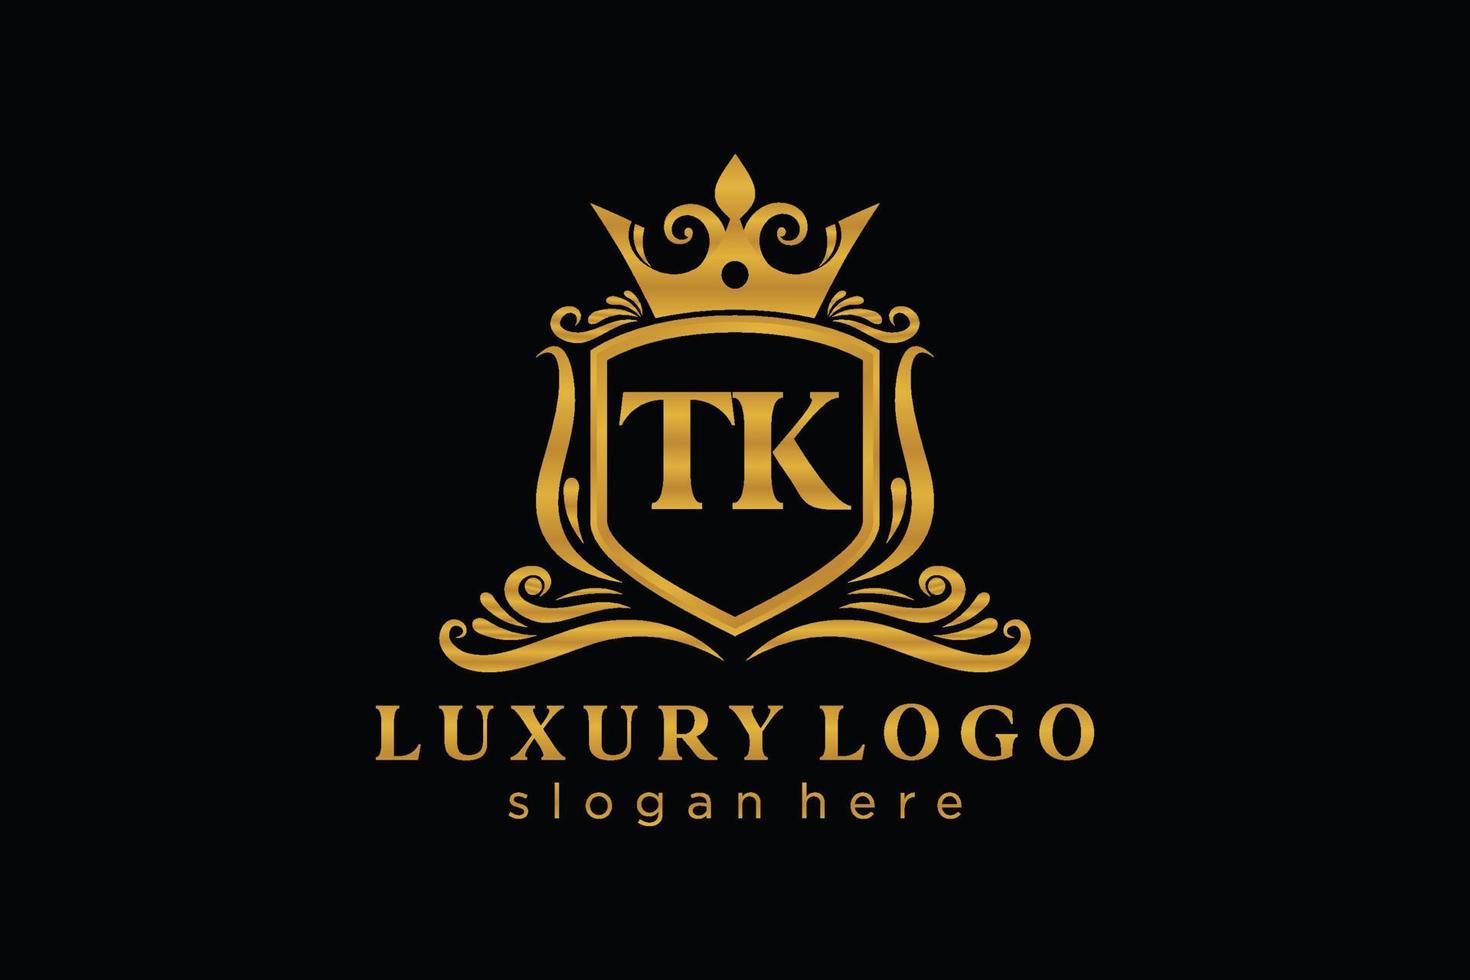 Initial TK Letter Royal Luxury Logo template in vector art for Restaurant, Royalty, Boutique, Cafe, Hotel, Heraldic, Jewelry, Fashion and other vector illustration.